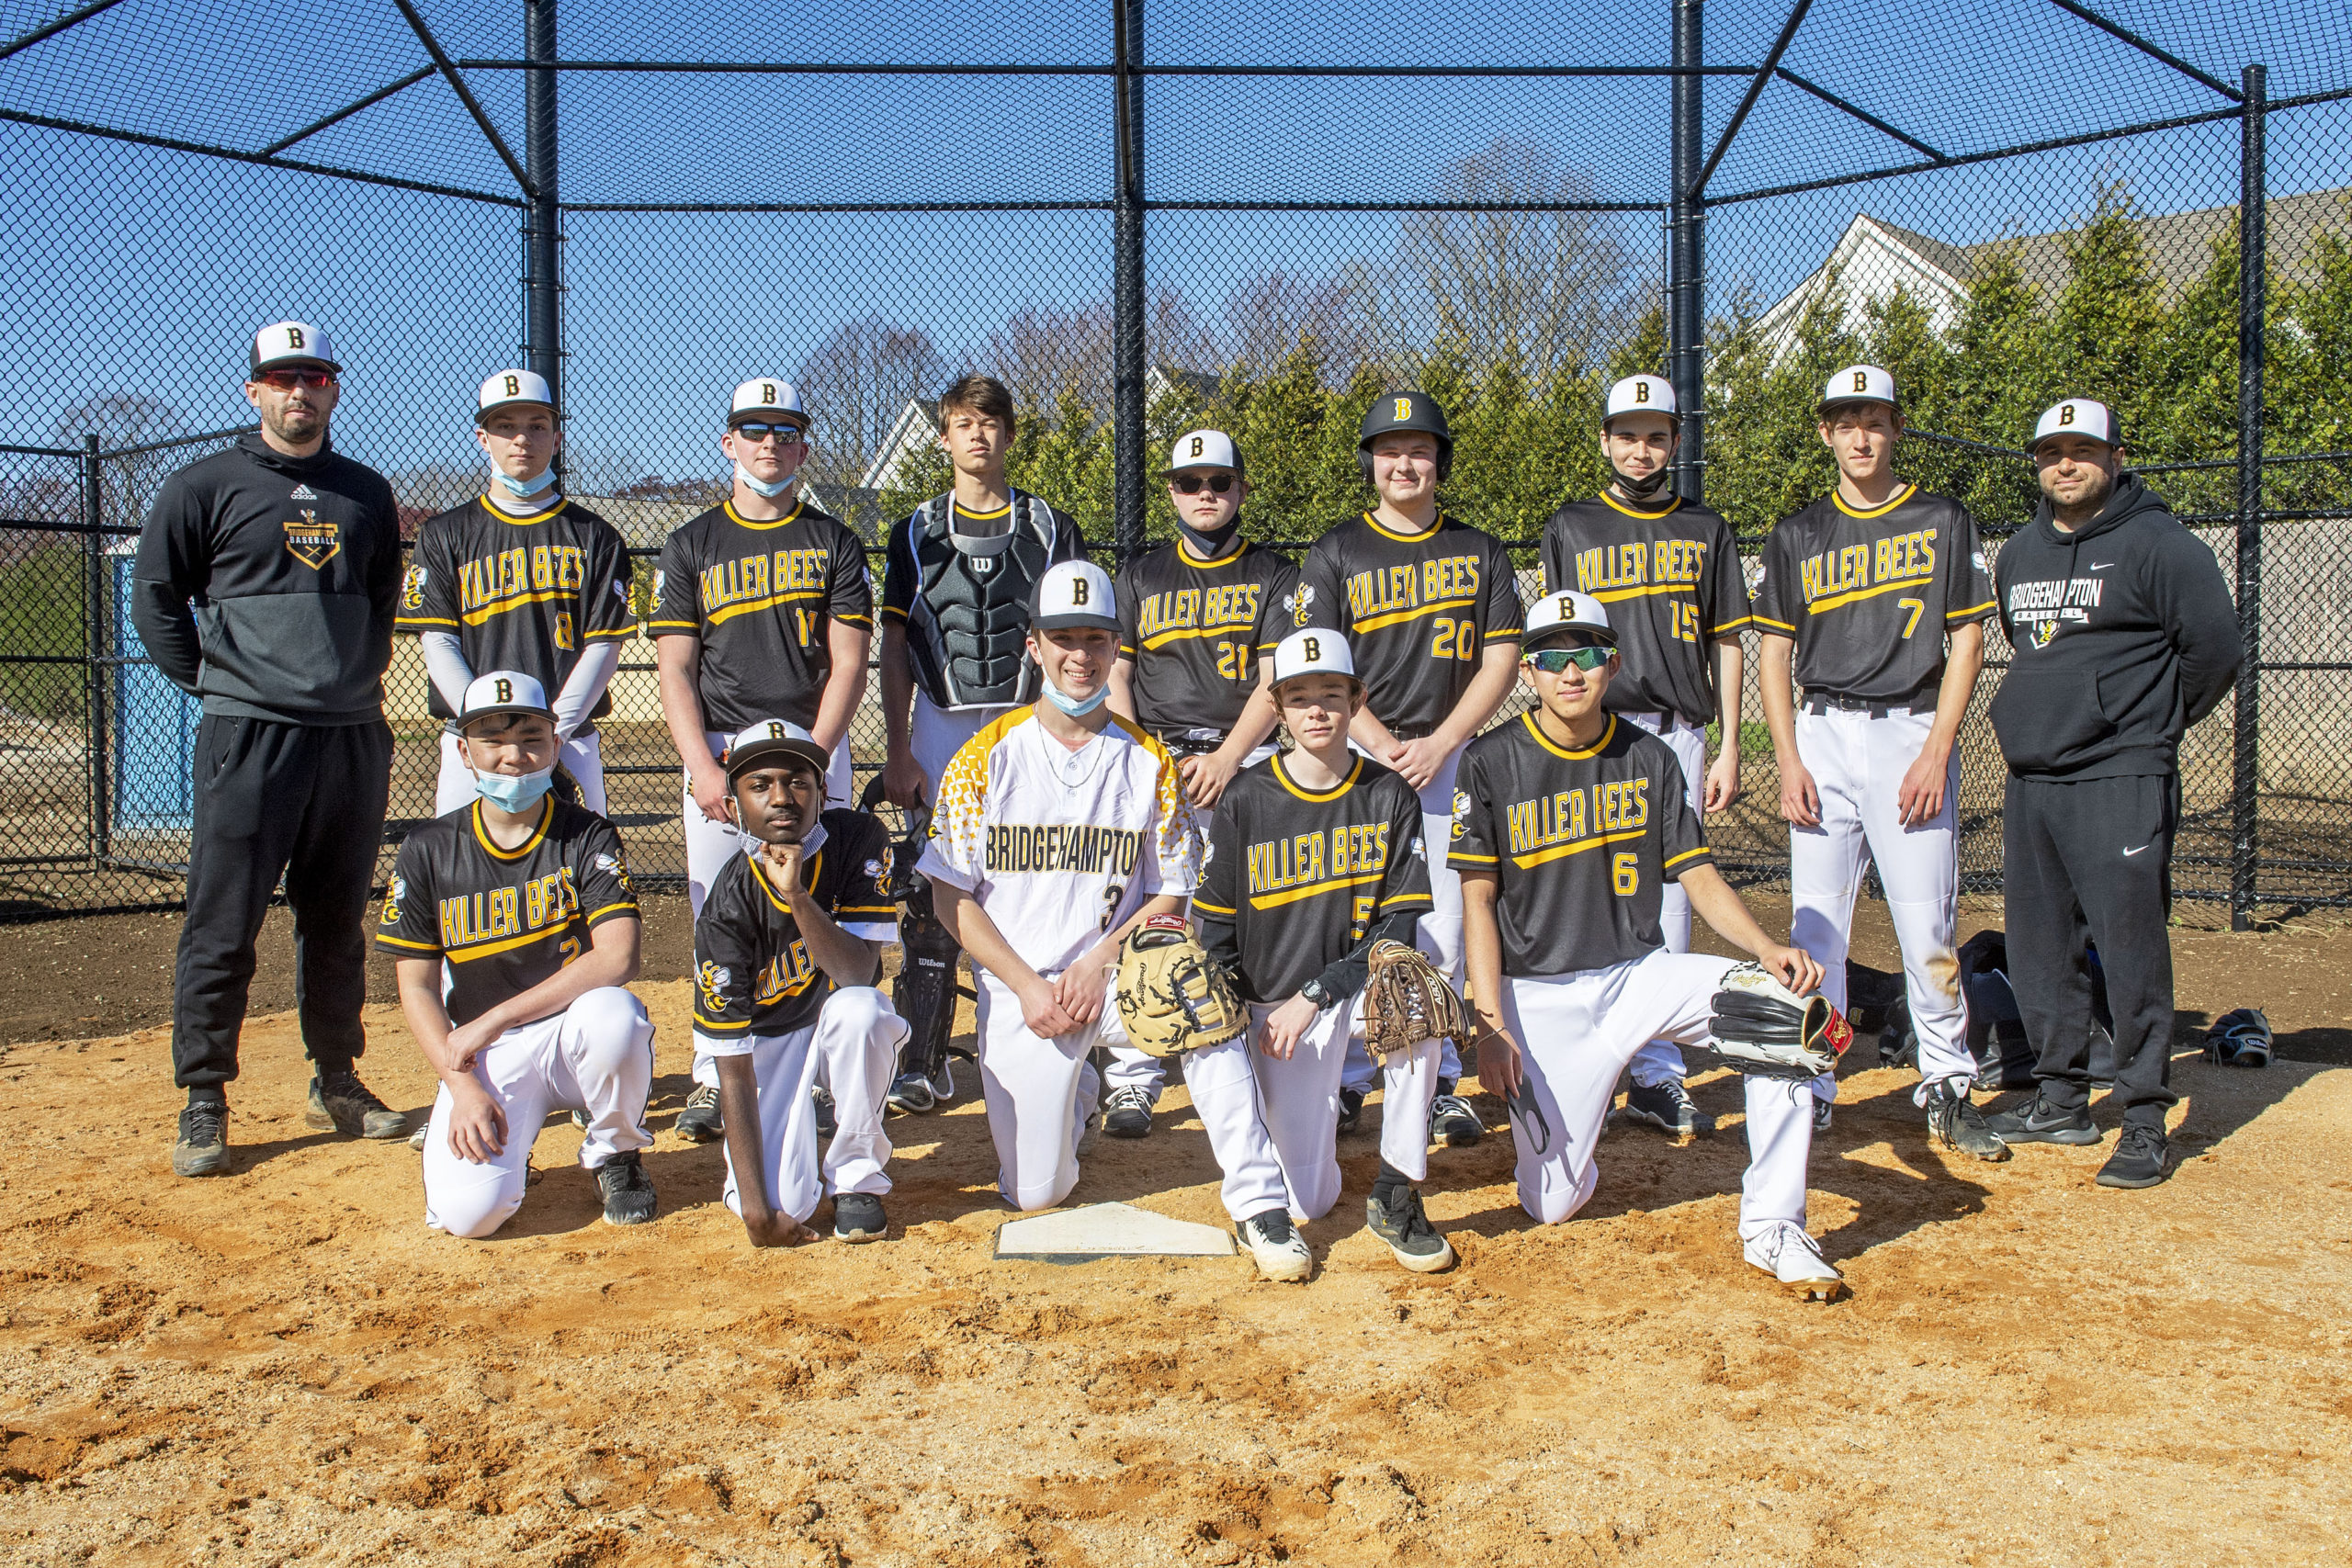 Members of the first Bridgehampton High School baseball team in four decades began practicing this week for an inaugural junior varsity season. Front row, from left: Hugo Kapon, Neo Simmons, Kris Vinski, Will Husband, and Yudai Morikawa. Second row, from left, Coach Lou Liberatore, Scott Vinski, Dylan Fitzgerald, Milo Tompkins, Shawn Gnyp, Jack Boeshore, Evan Buccigross, Eli Wolf, and assistant coach Michael DeRosa. Tyler Fitzgerald, Naiven Mabry, Kaylee Sanchez, and Leah Meyerson are missing. MICHAEL HELLER